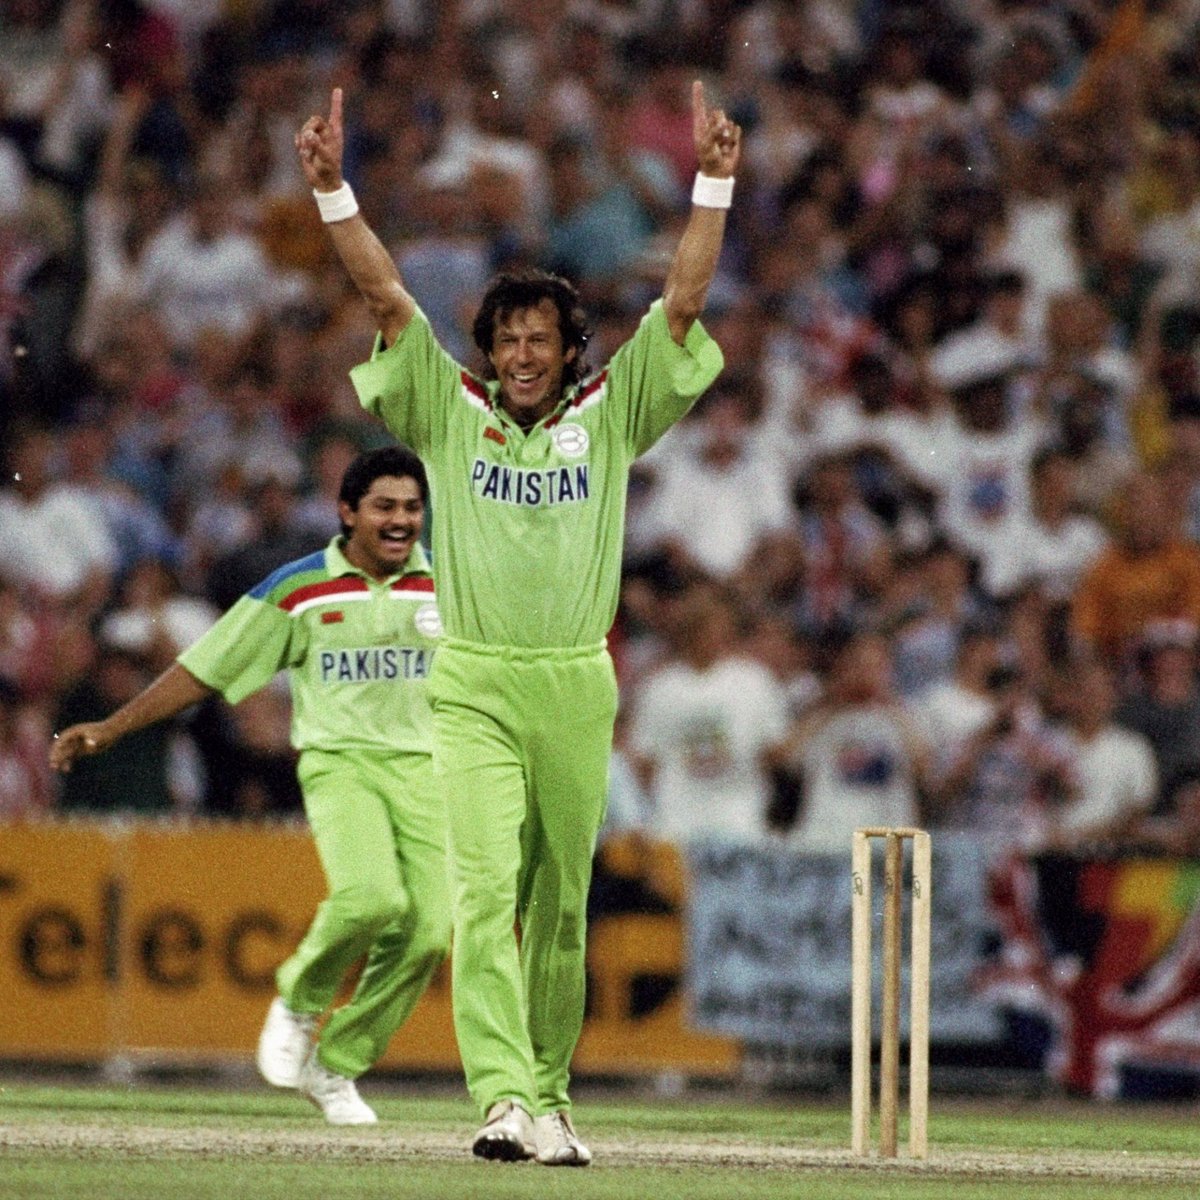 Thread:
Imran Khan: Unveiling the Legend! A Cricket Star's Rise, Imran Khan embarked on his remarkable journey in the realm of cricket, solidifying his status as a formidable all-rounder & guiding Pakistan to triumph in the prestigious 92 Cricket World Cup
#عمران_خان_ایک_نظریہ_ہے